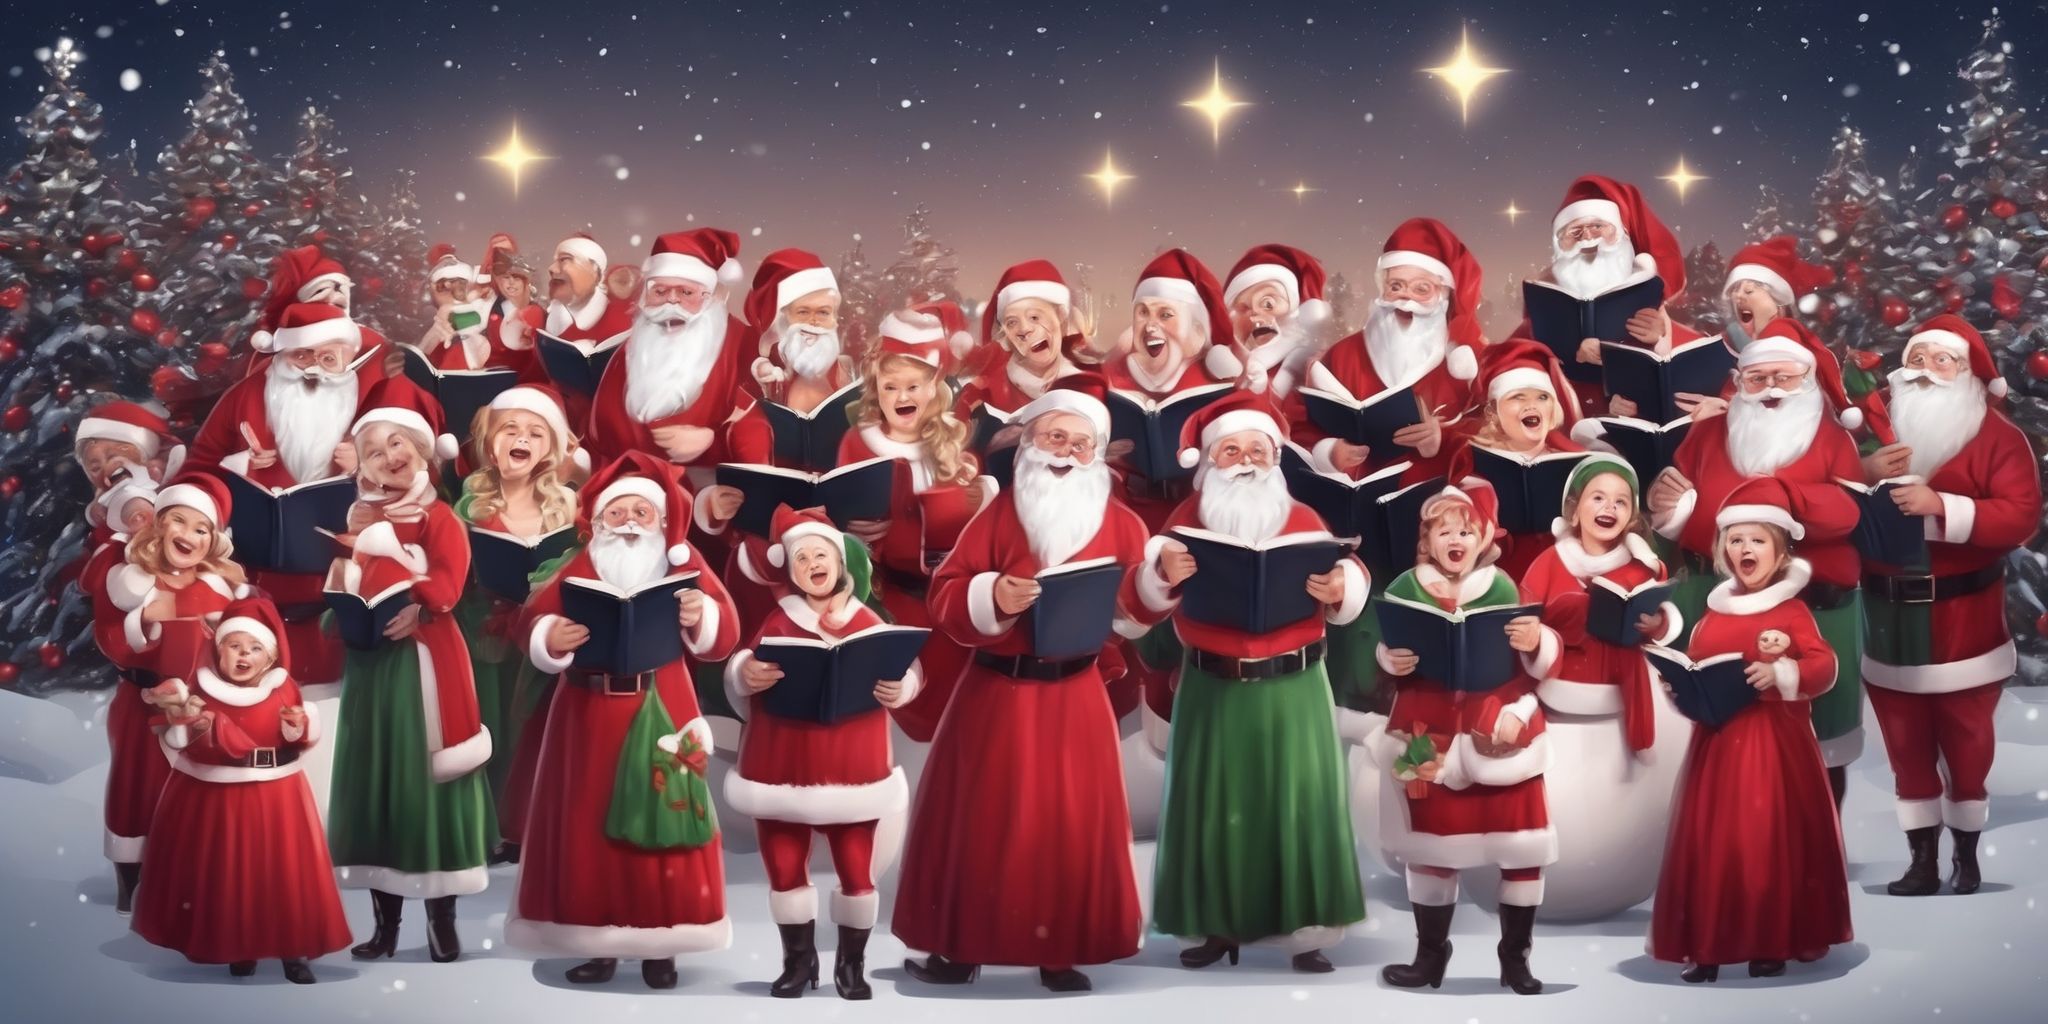 Chorus in realistic Christmas style